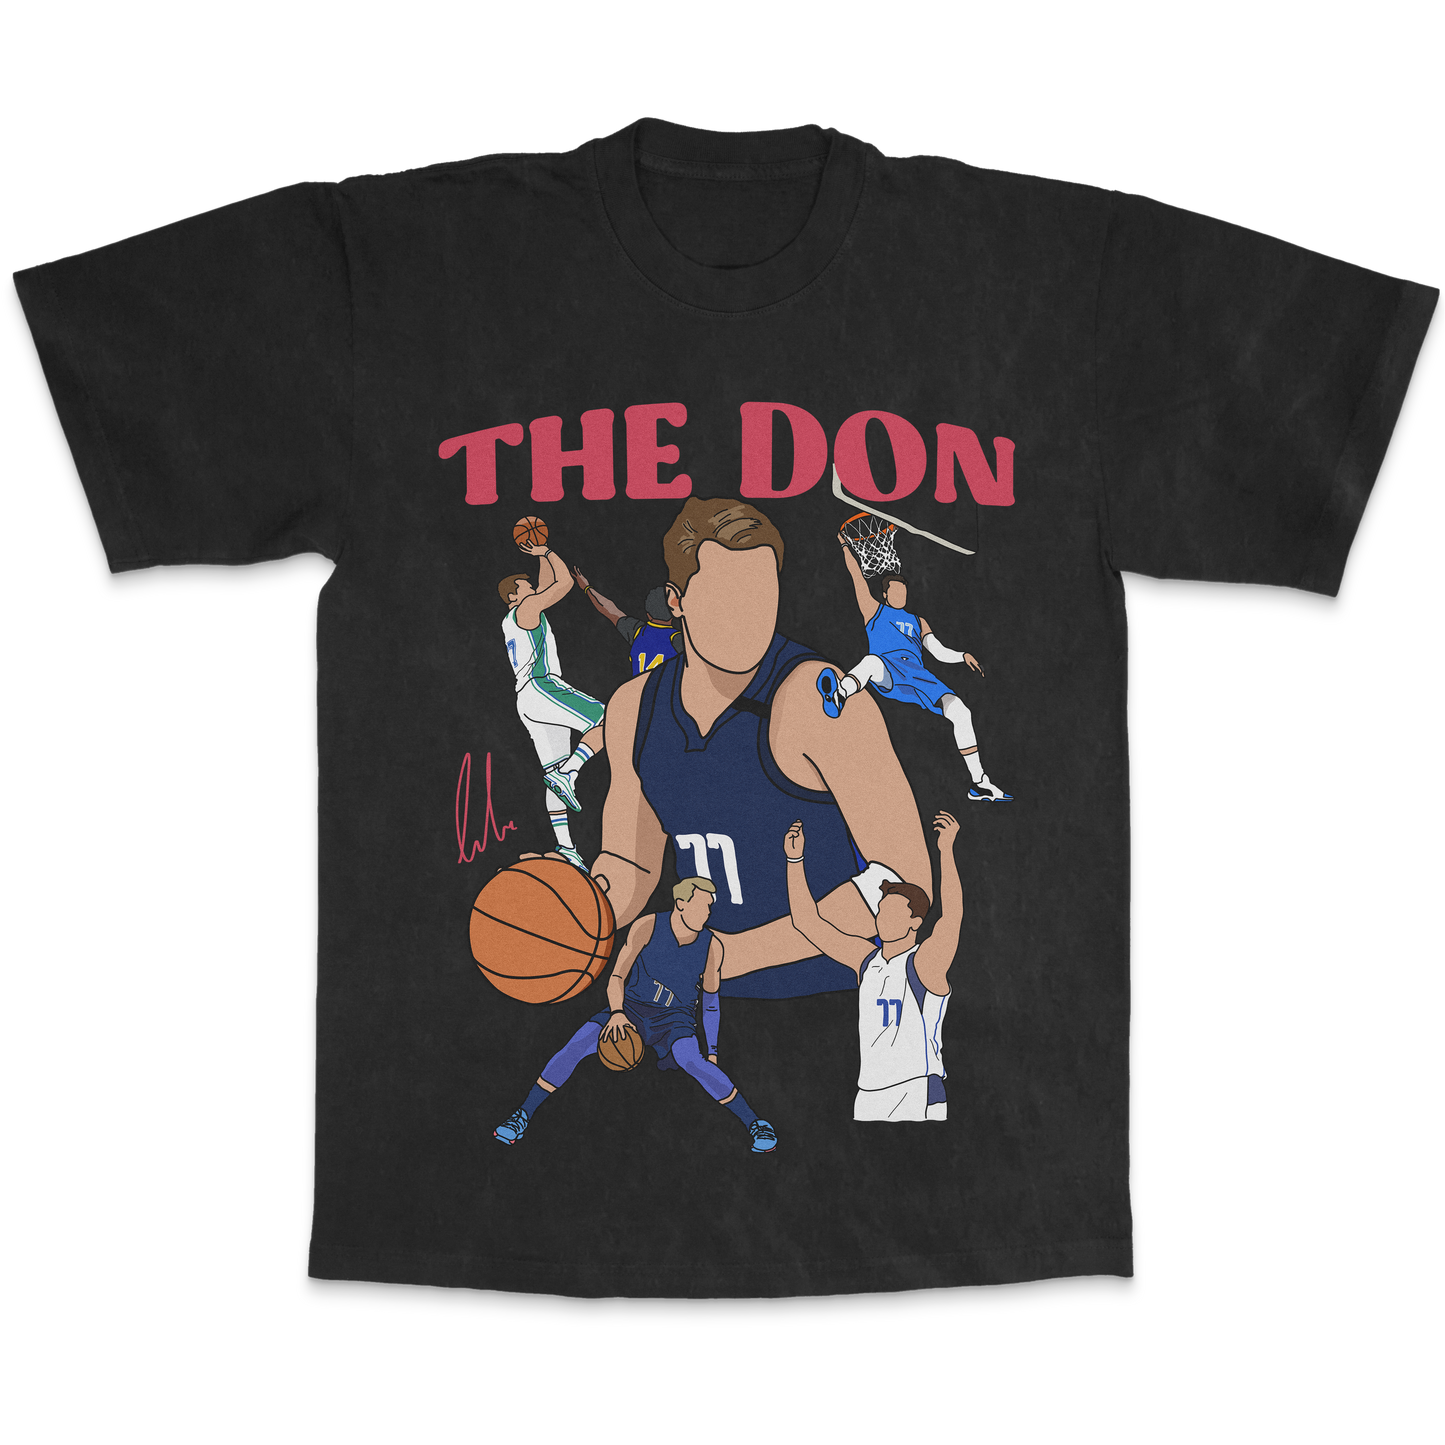 "THE DON" TEE